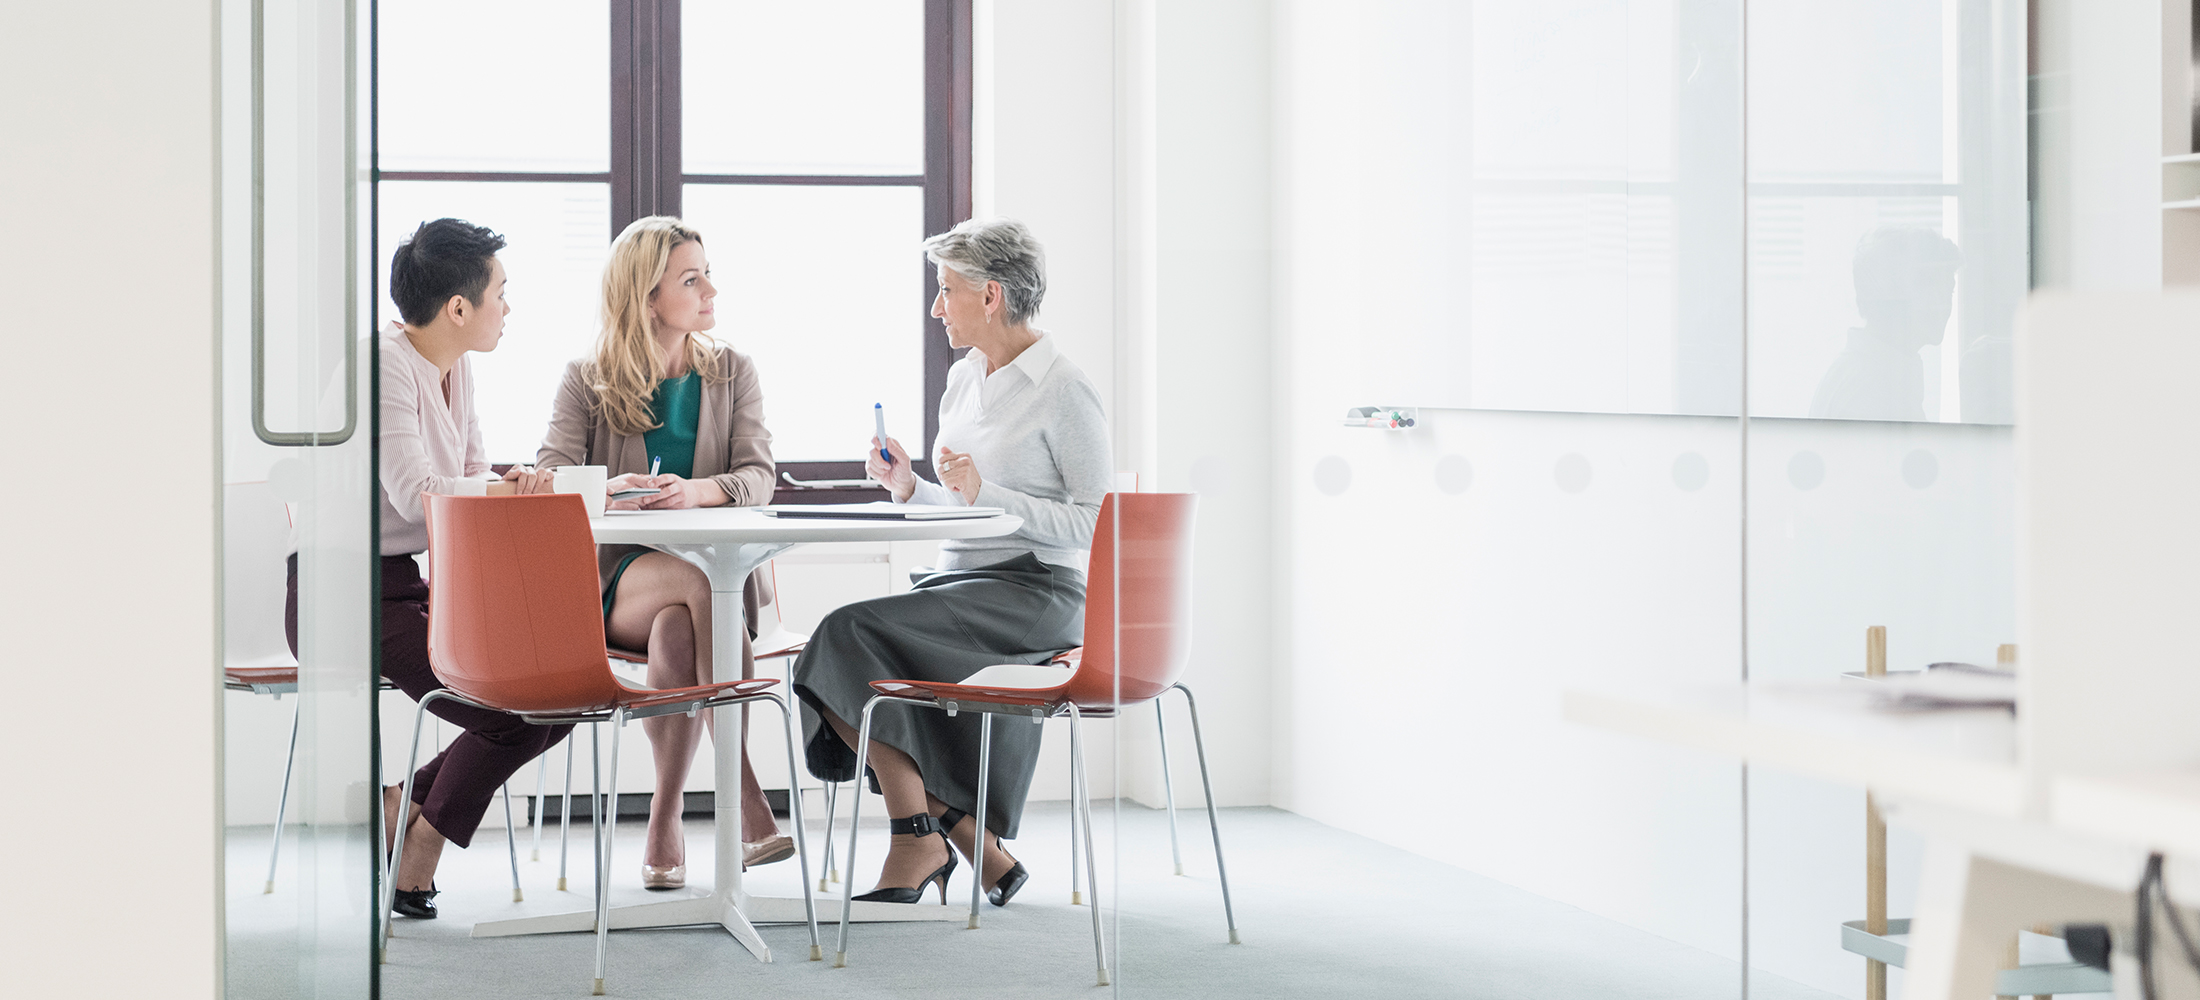 Three women sitting at table in modern office